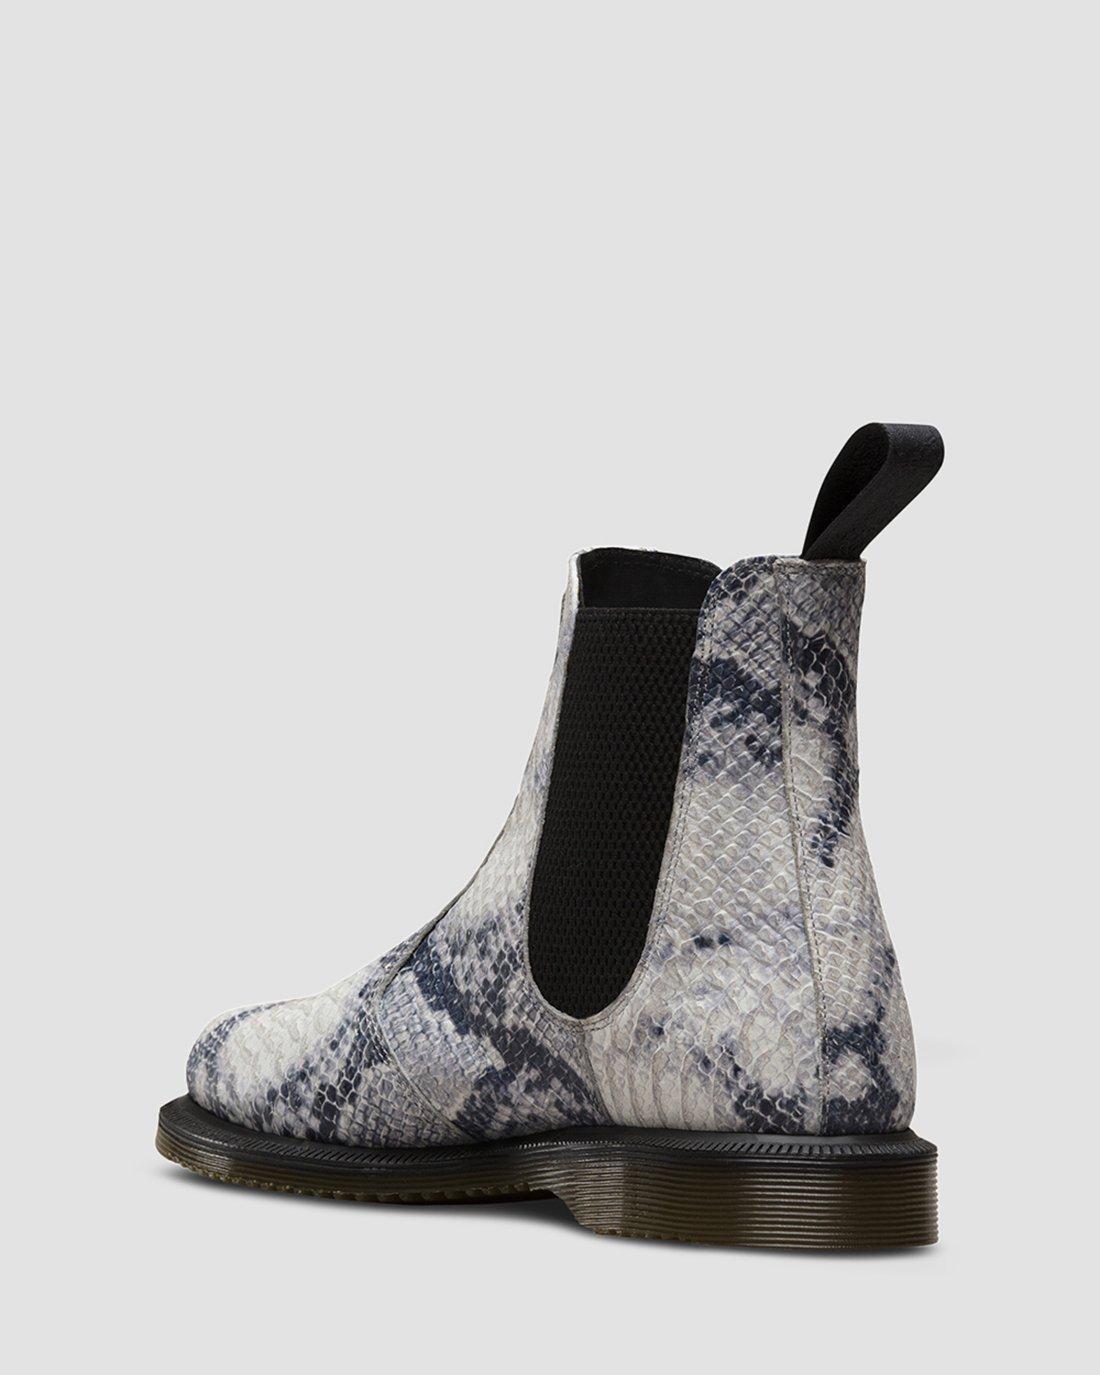 martens chelsea boots snakeskin - OFF-66% >Free Delivery